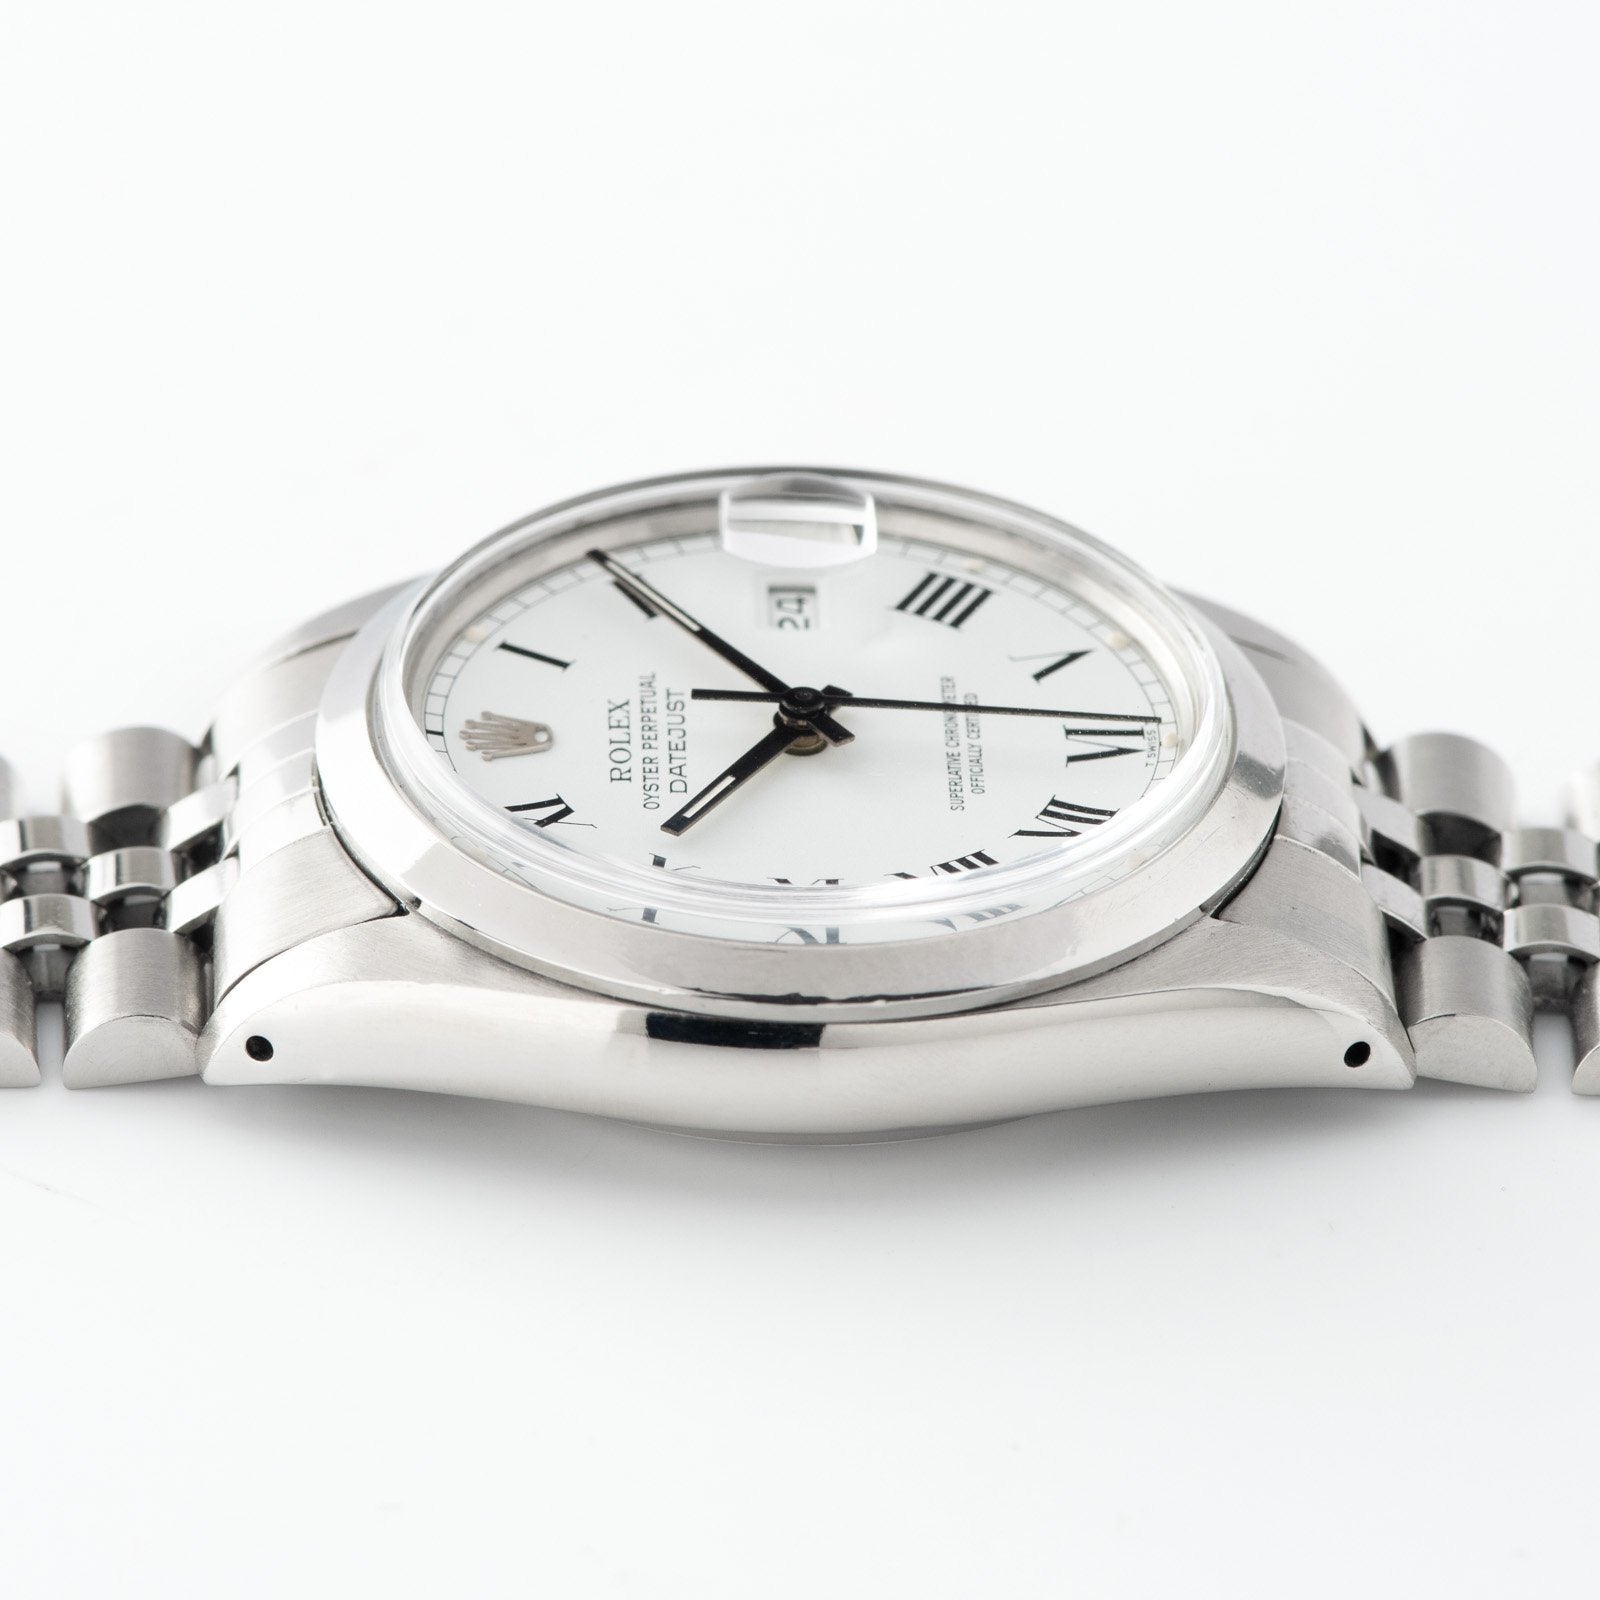 Rolex Datejust Reference 16000 Buckley Dial